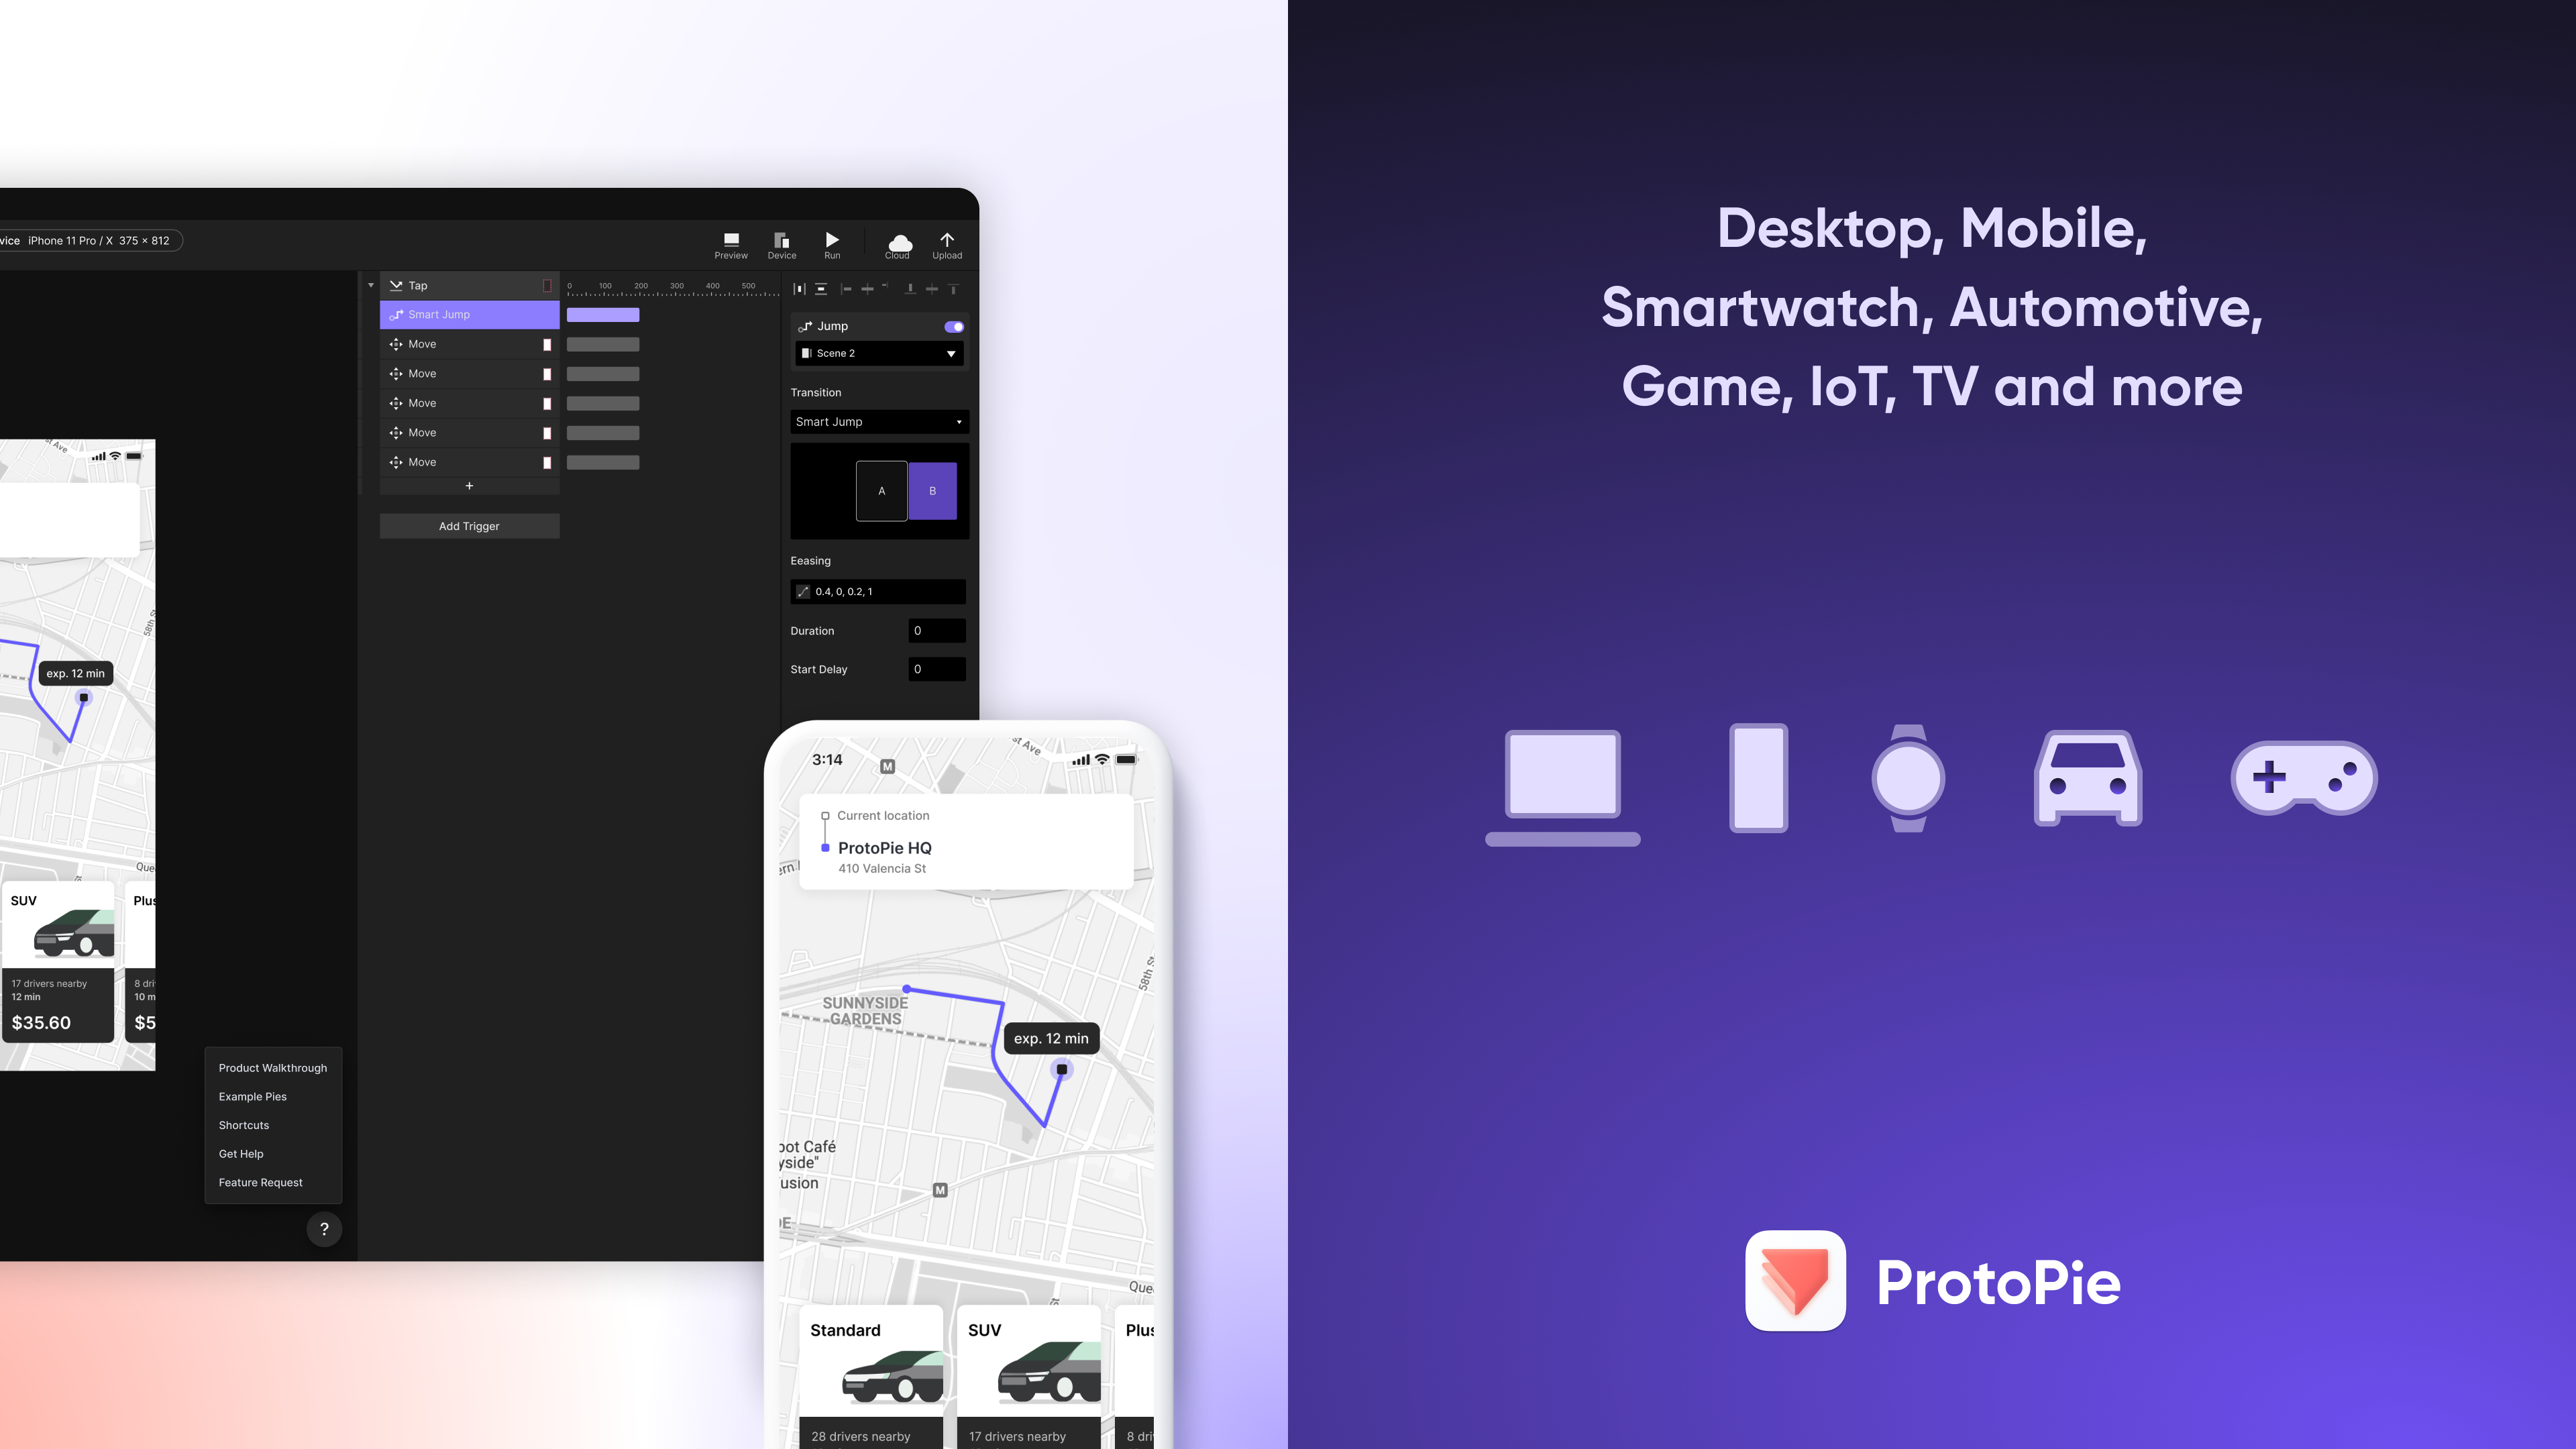 ProtoPie works on all devices such as Desktop, Mobile, Smartwatch, IOT, Automotive, Custom hardware etc.